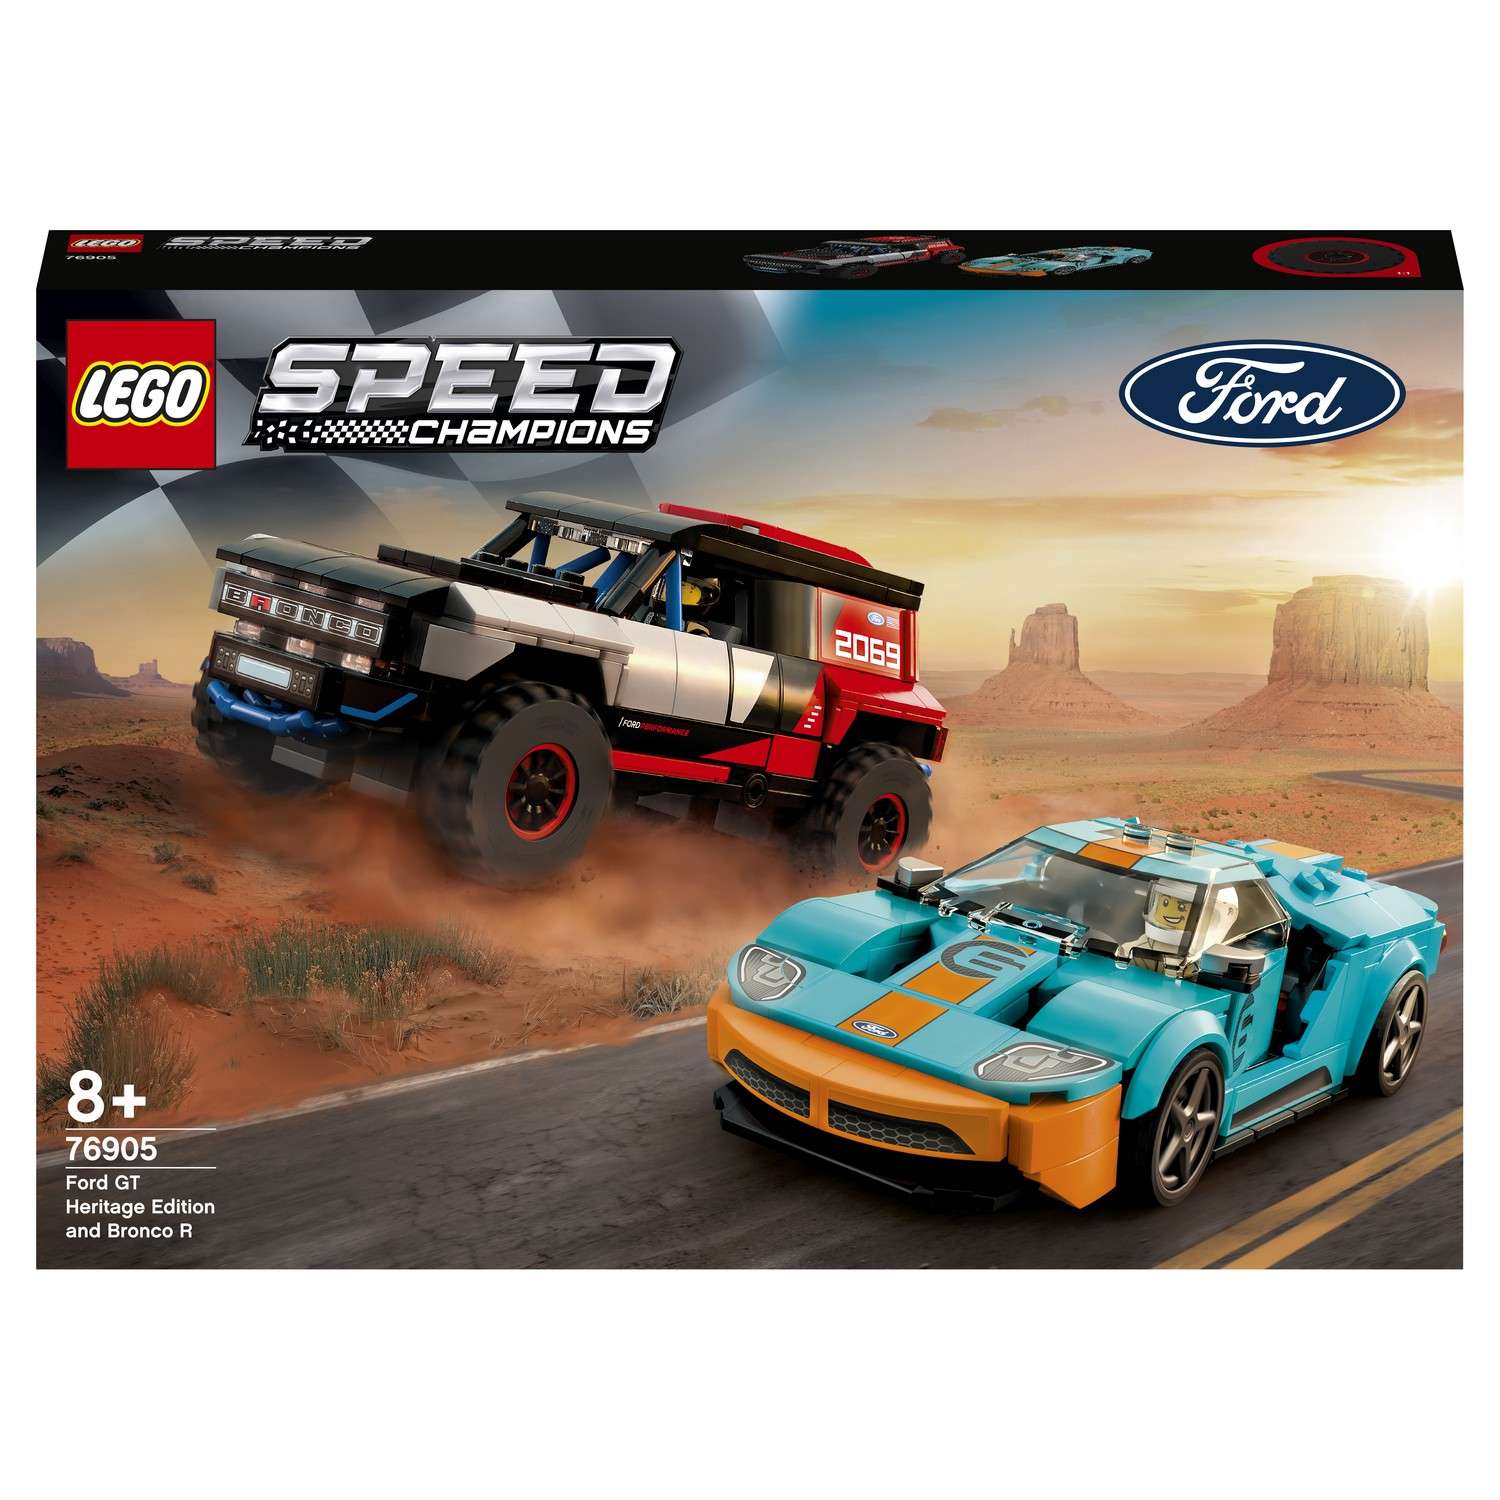 Конструктор LEGO Speed Champions Ford GT Heritage Edition and Bronco R 76905 - фото 2